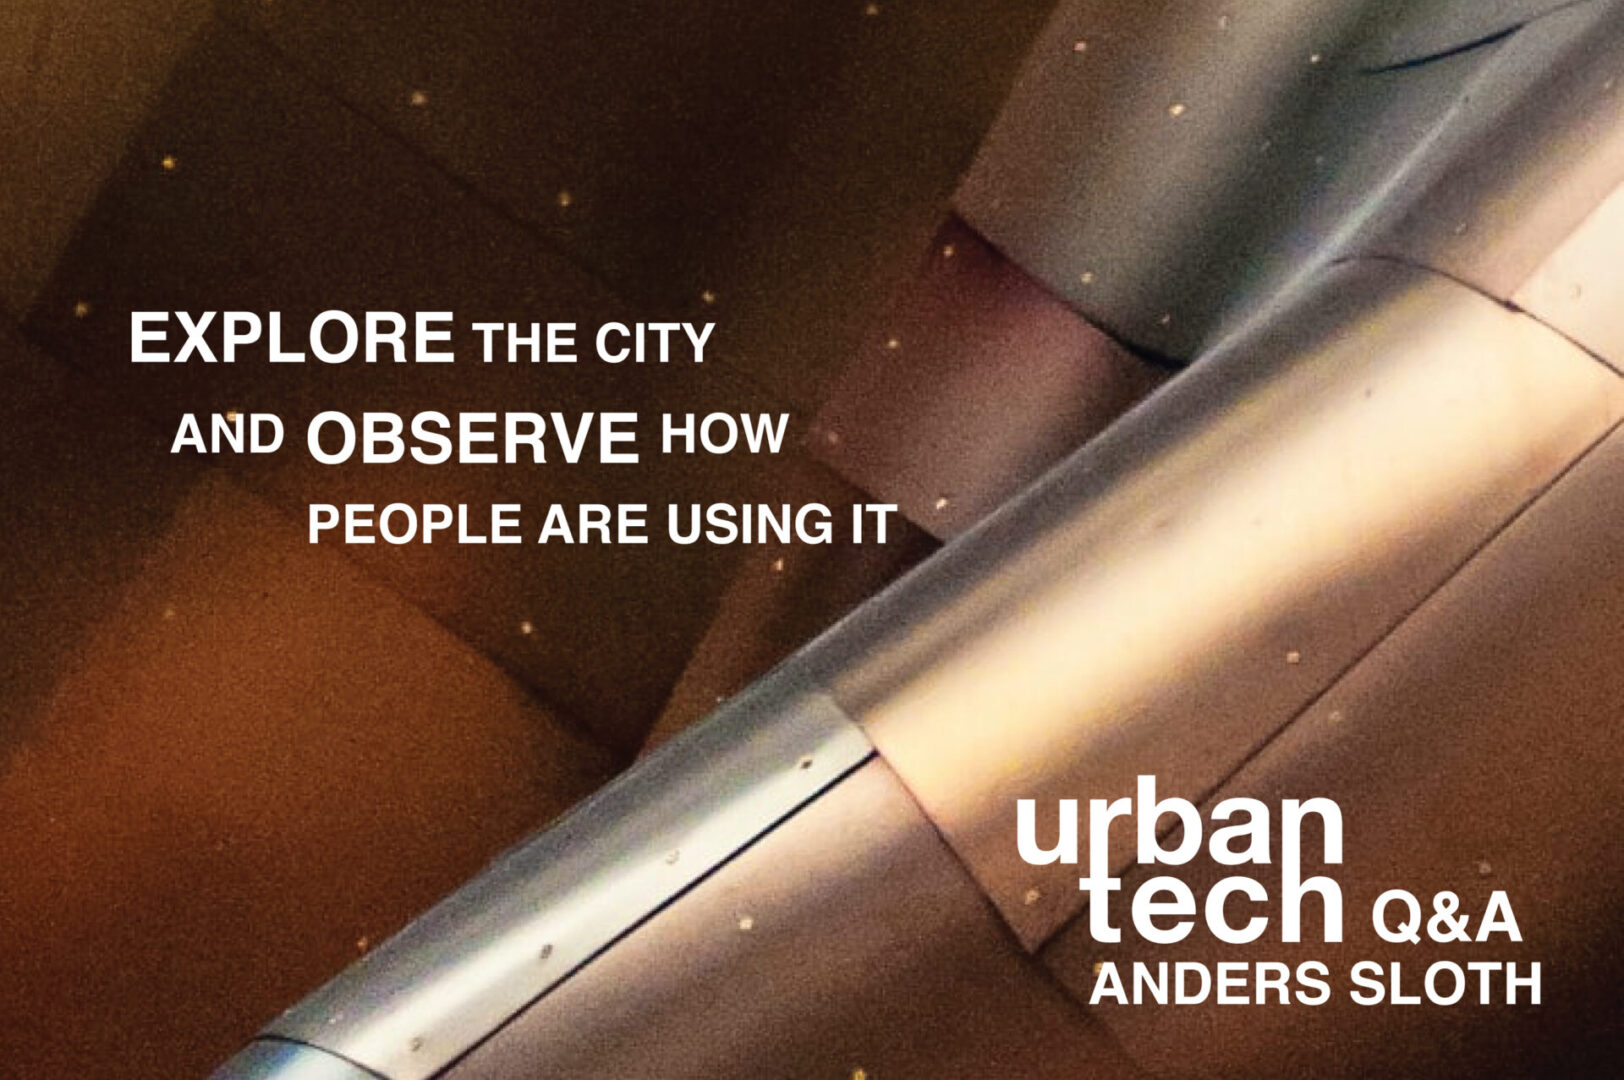 Explore the city and observe how people are using it - urbantech q&a with Anders Sloth